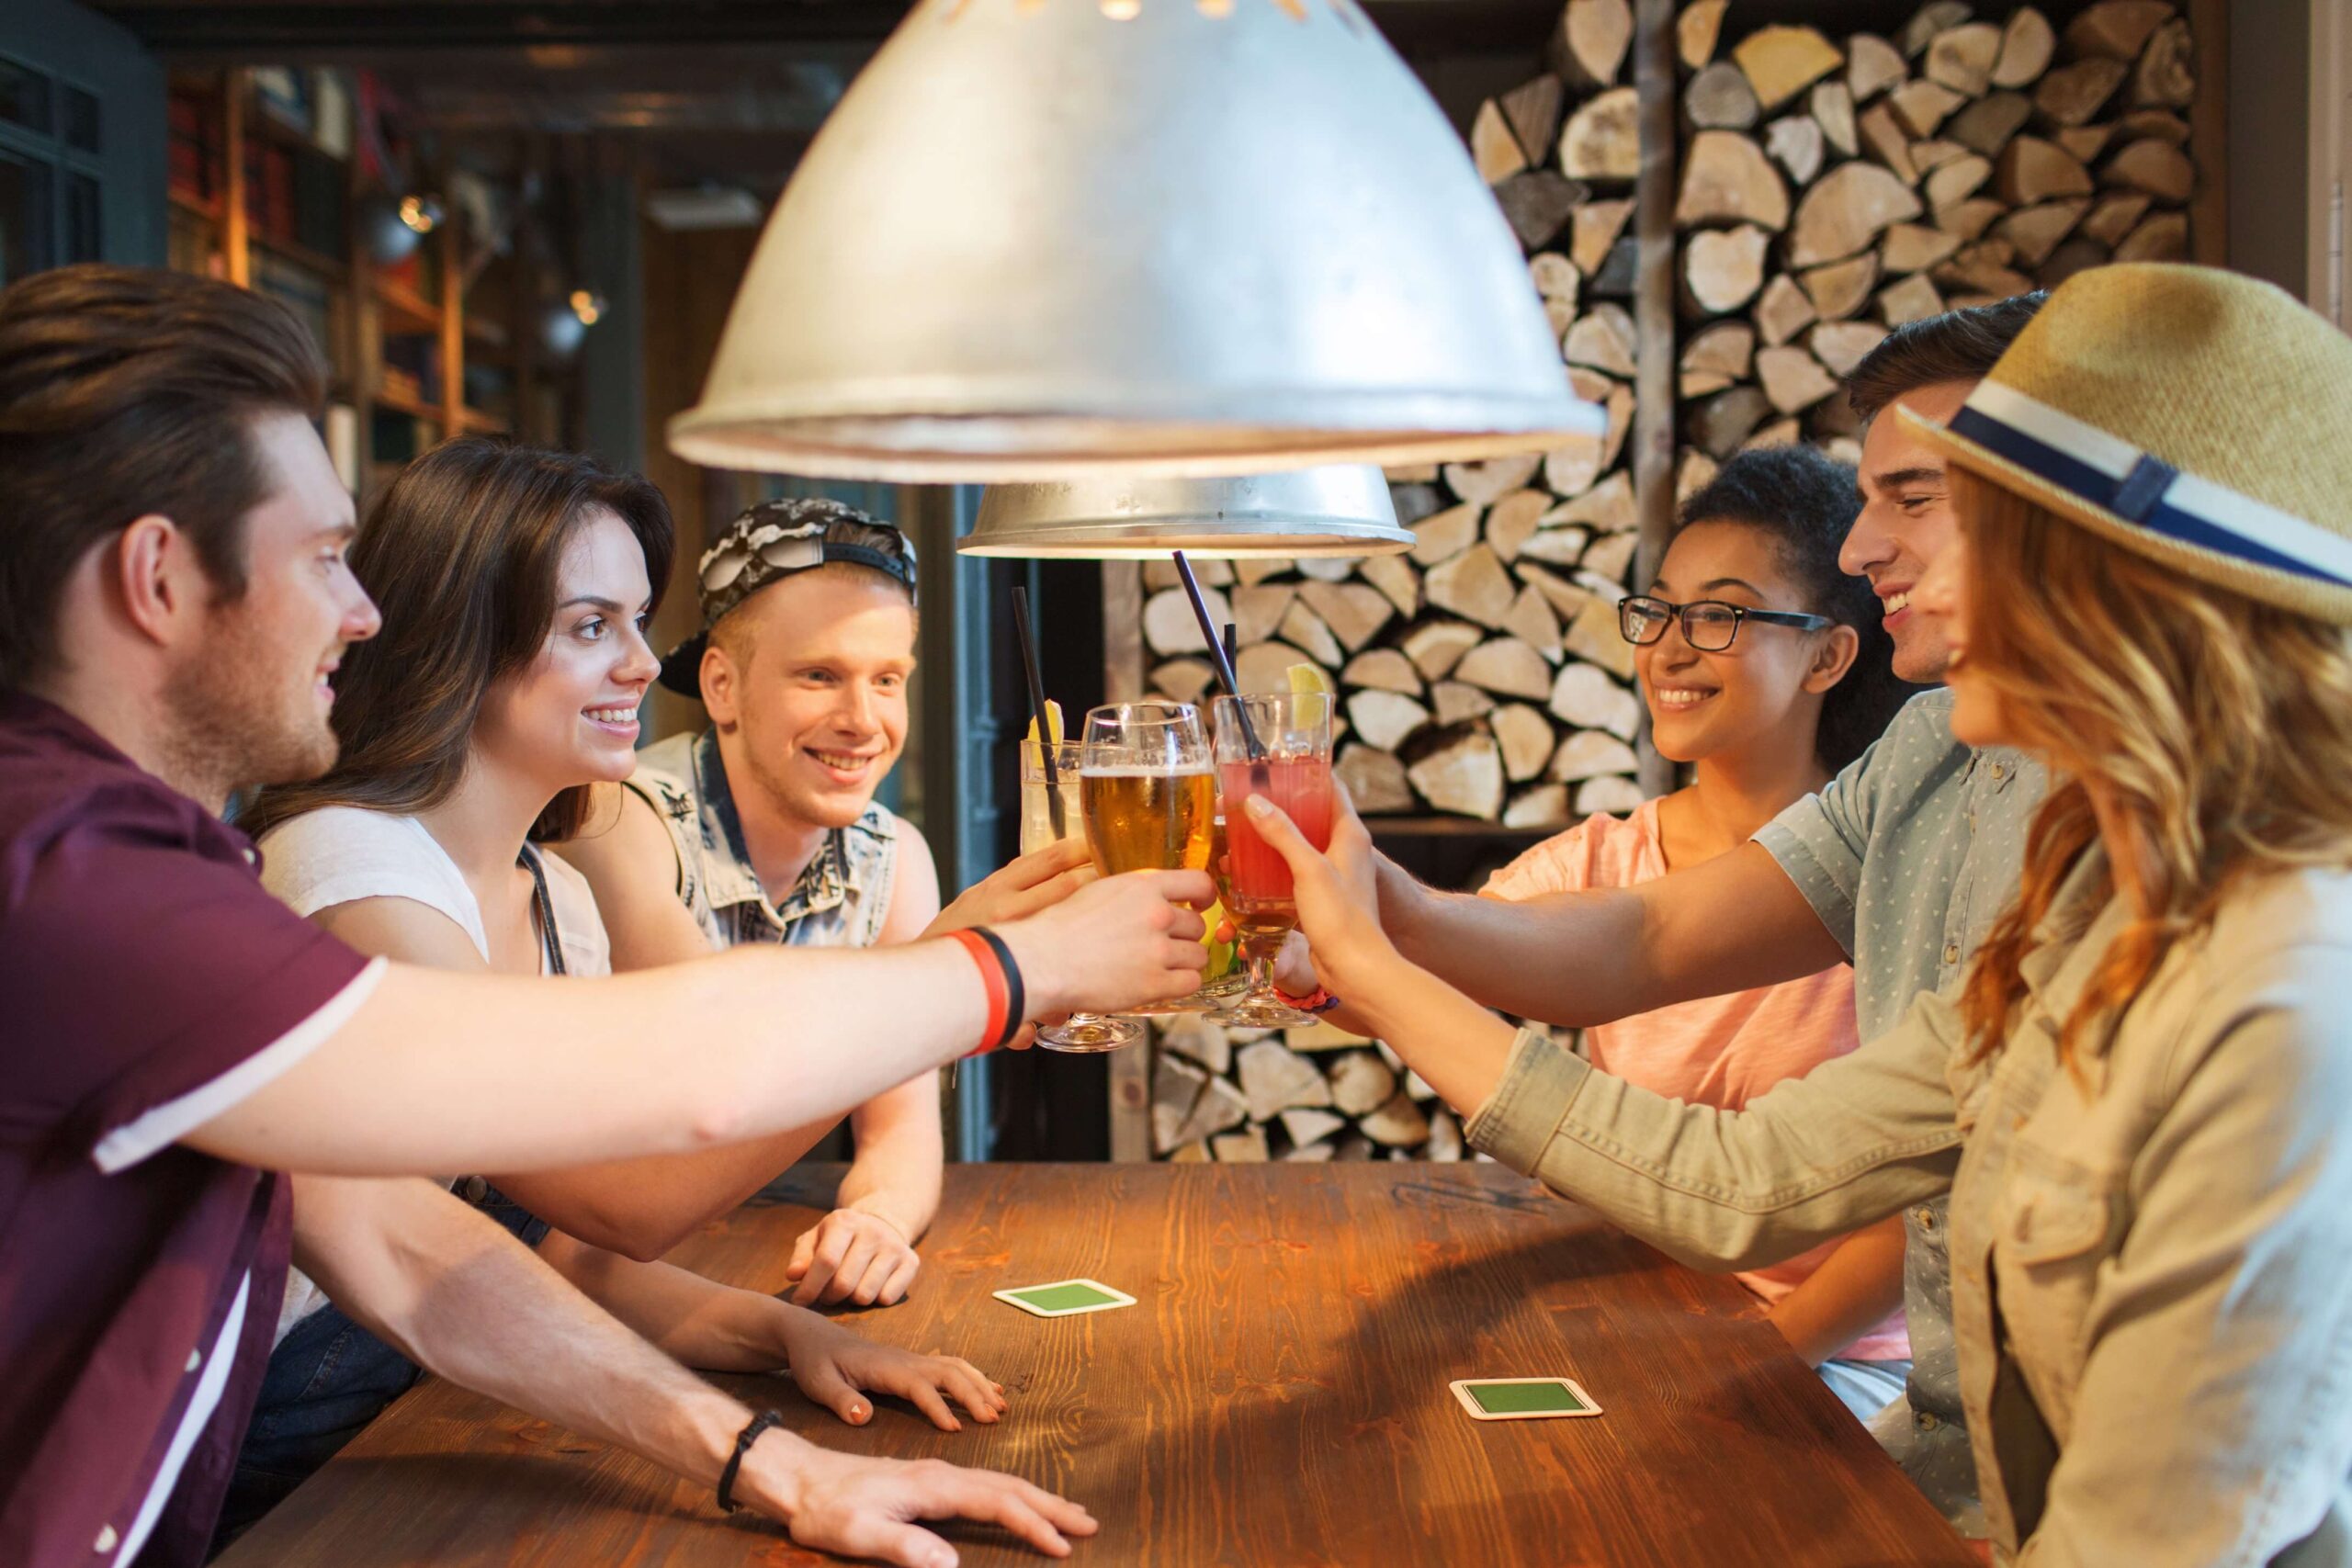 Go Out With Your Friends At The Best Bars In Sunriver and Bend, Oregon